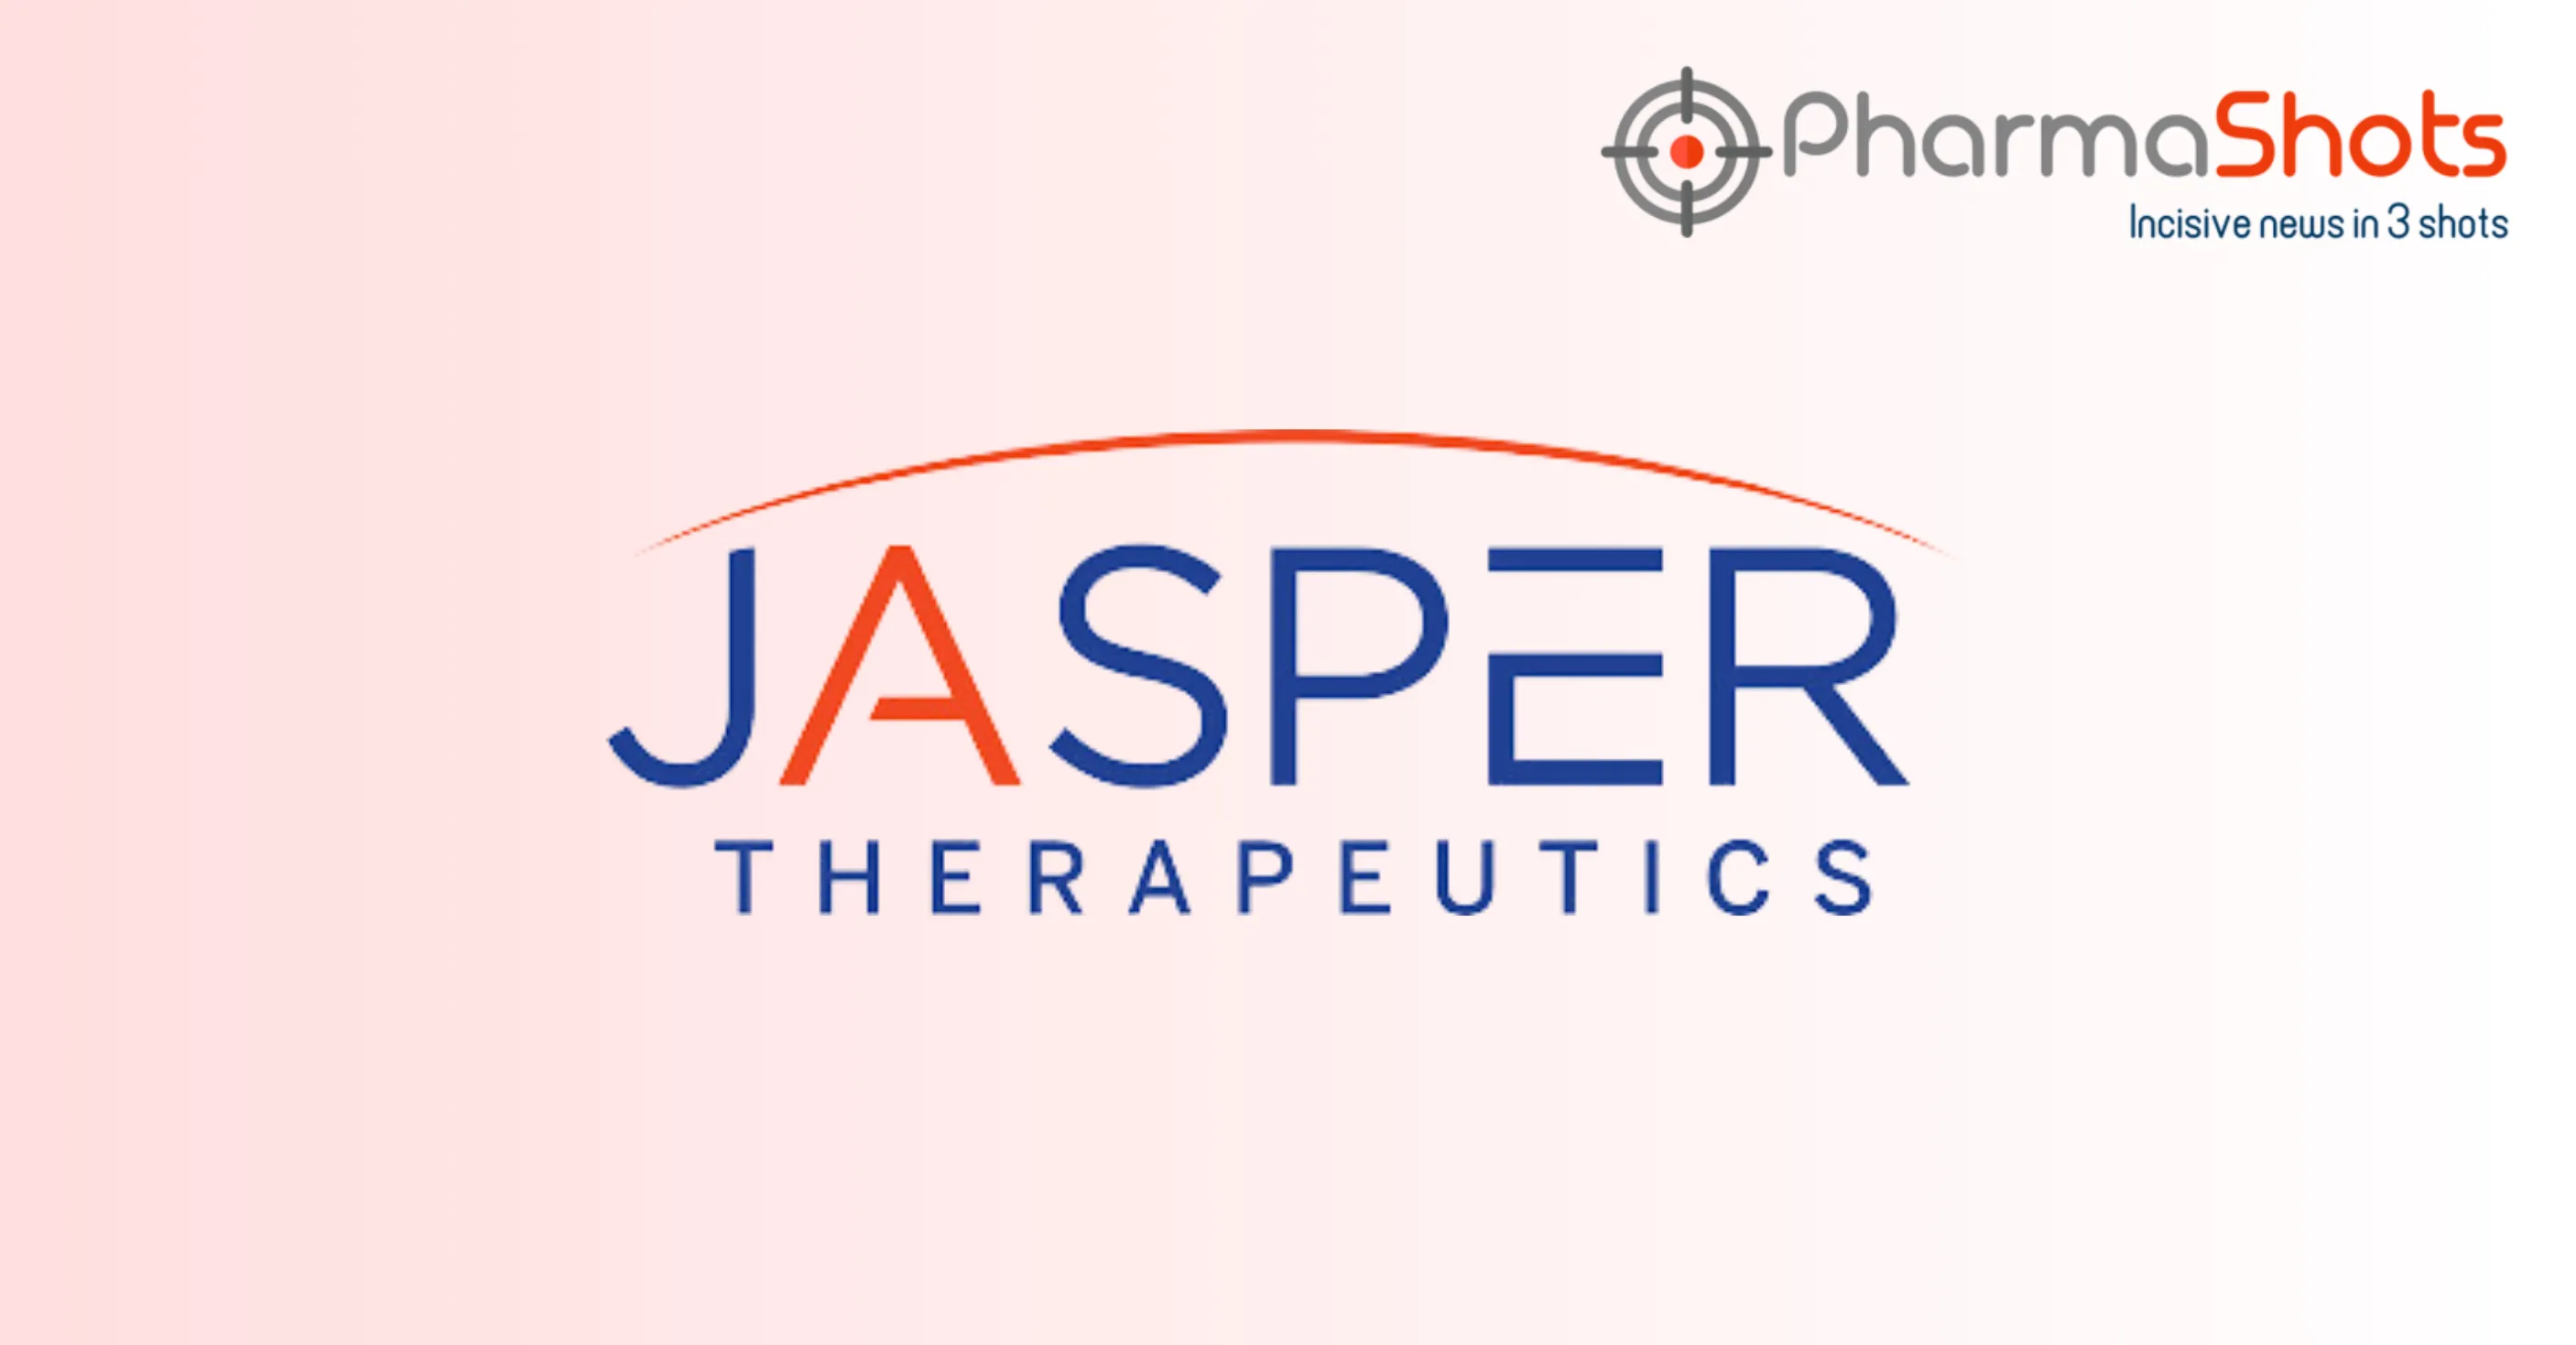 Jasper Therapeutics Reports First Patient Dosing with Briquilimab in P-Ib/IIa Trial for Treating Chronic Inducible Urticaria